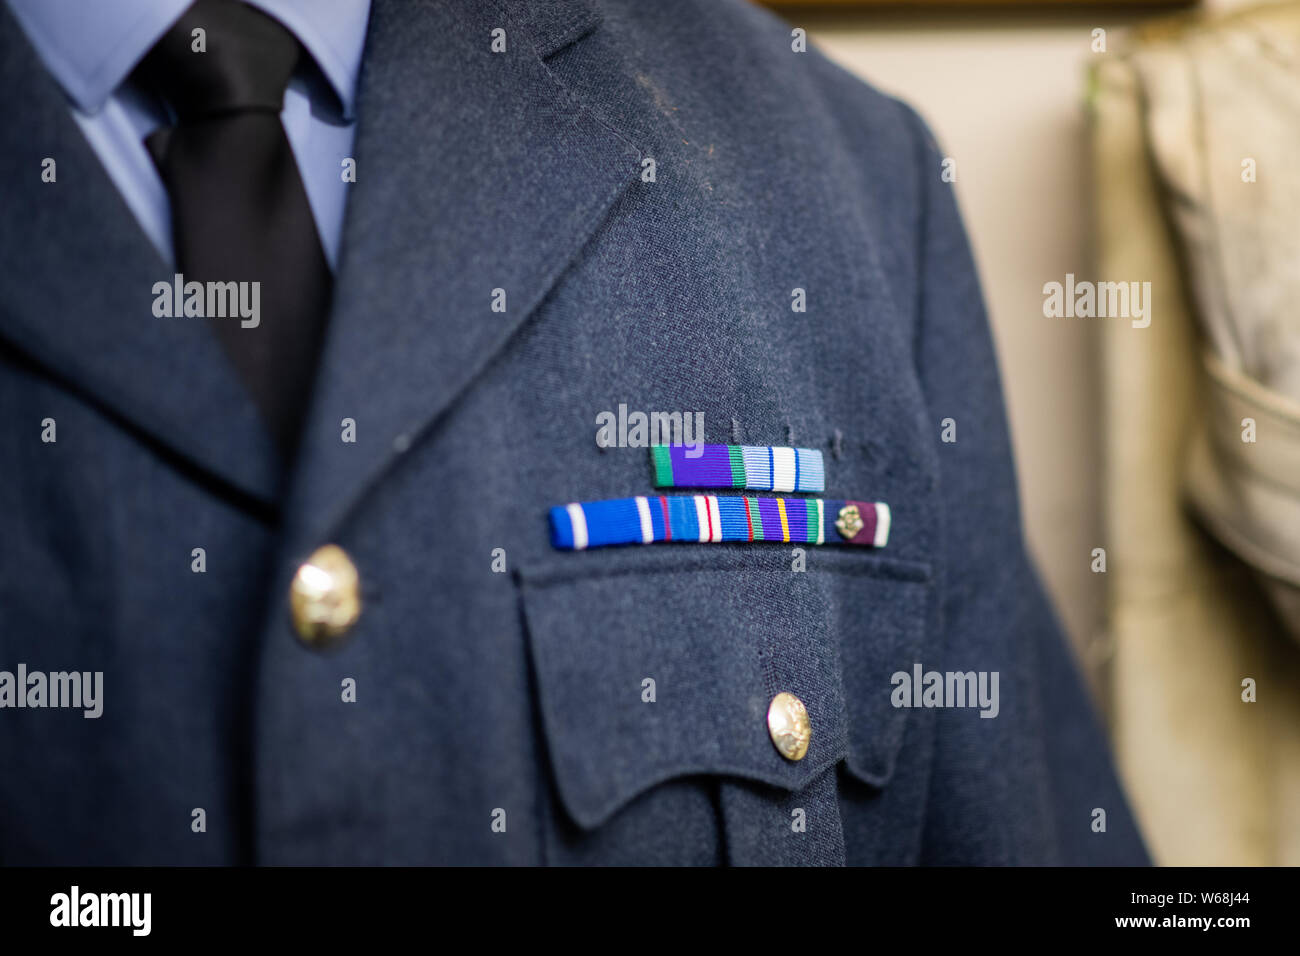 DONCASTER, UK - 28TH JULY 2019: A RAF uniform from World War 2 on display at Doncaster Aviation Museum with ribbons and medals Stock Photo